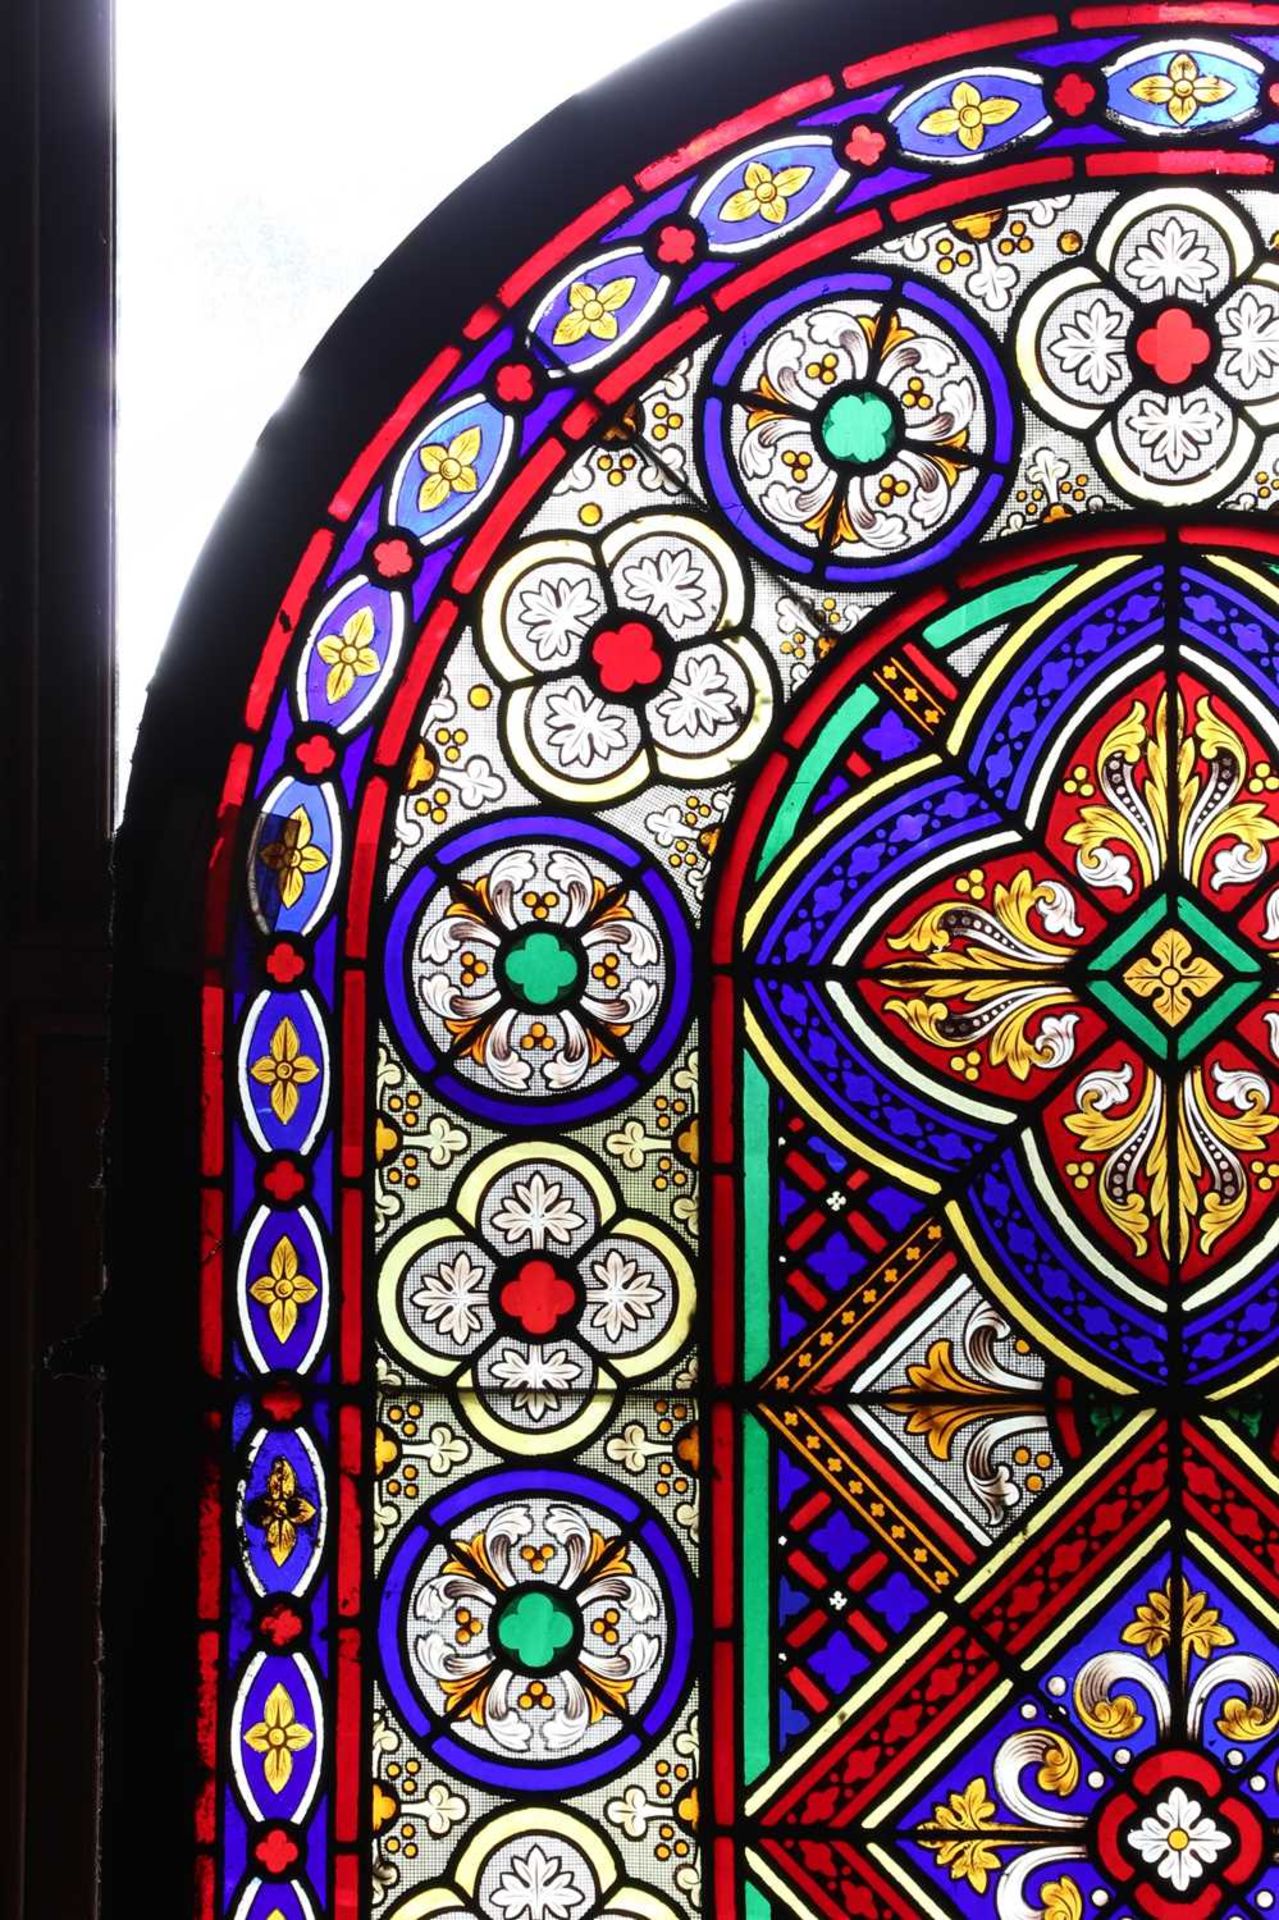 ☘ A Victorian Gothic Revival stained-glass window,